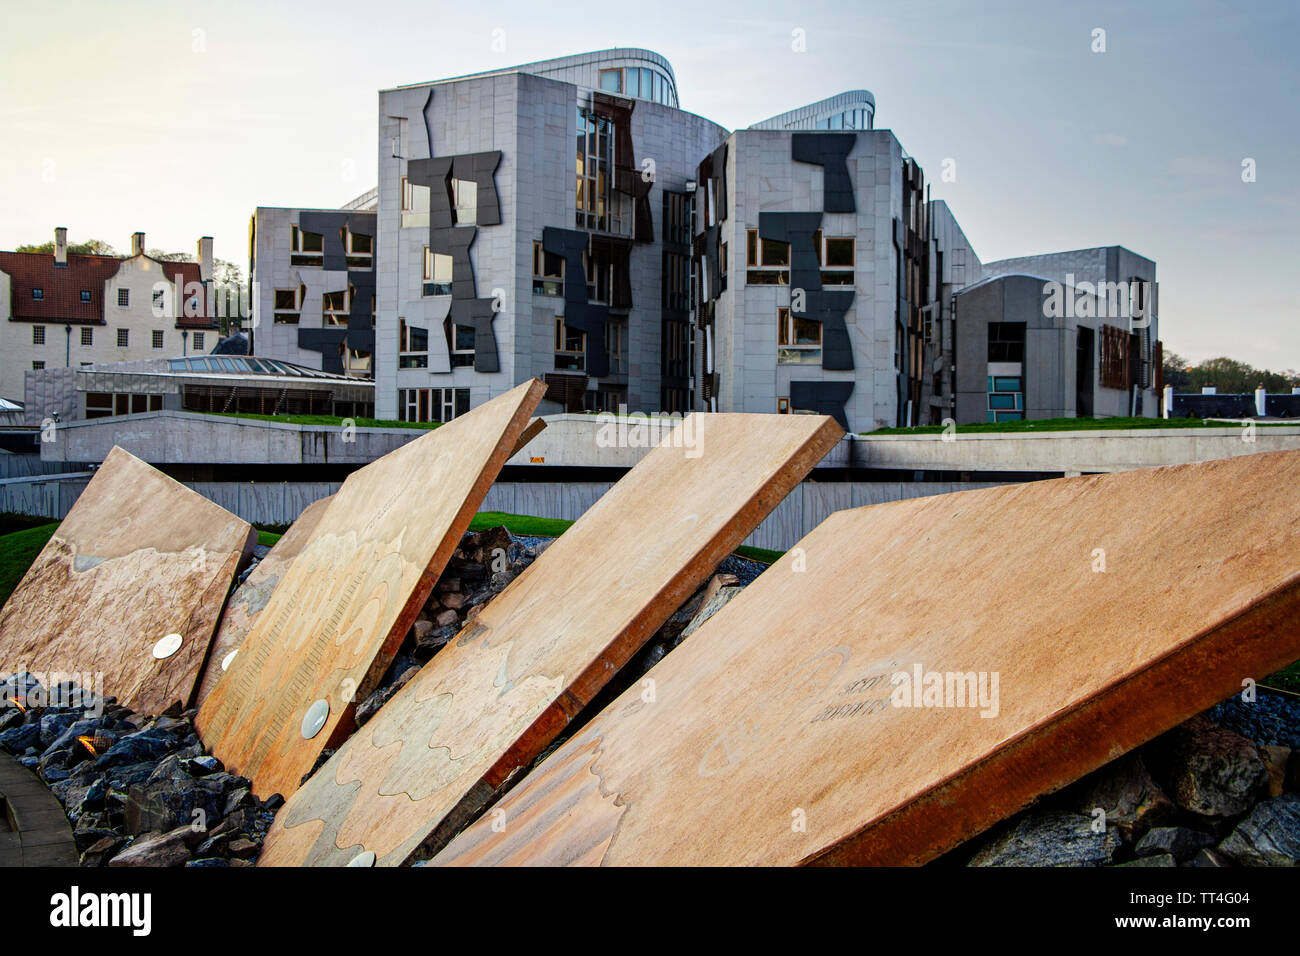 Slabs illustrating the geological stratum of United Kingdom at the entrance to Dynamic Earth in Edinburgh with the Holyrood Scottish Parliament buildi Stock Photo